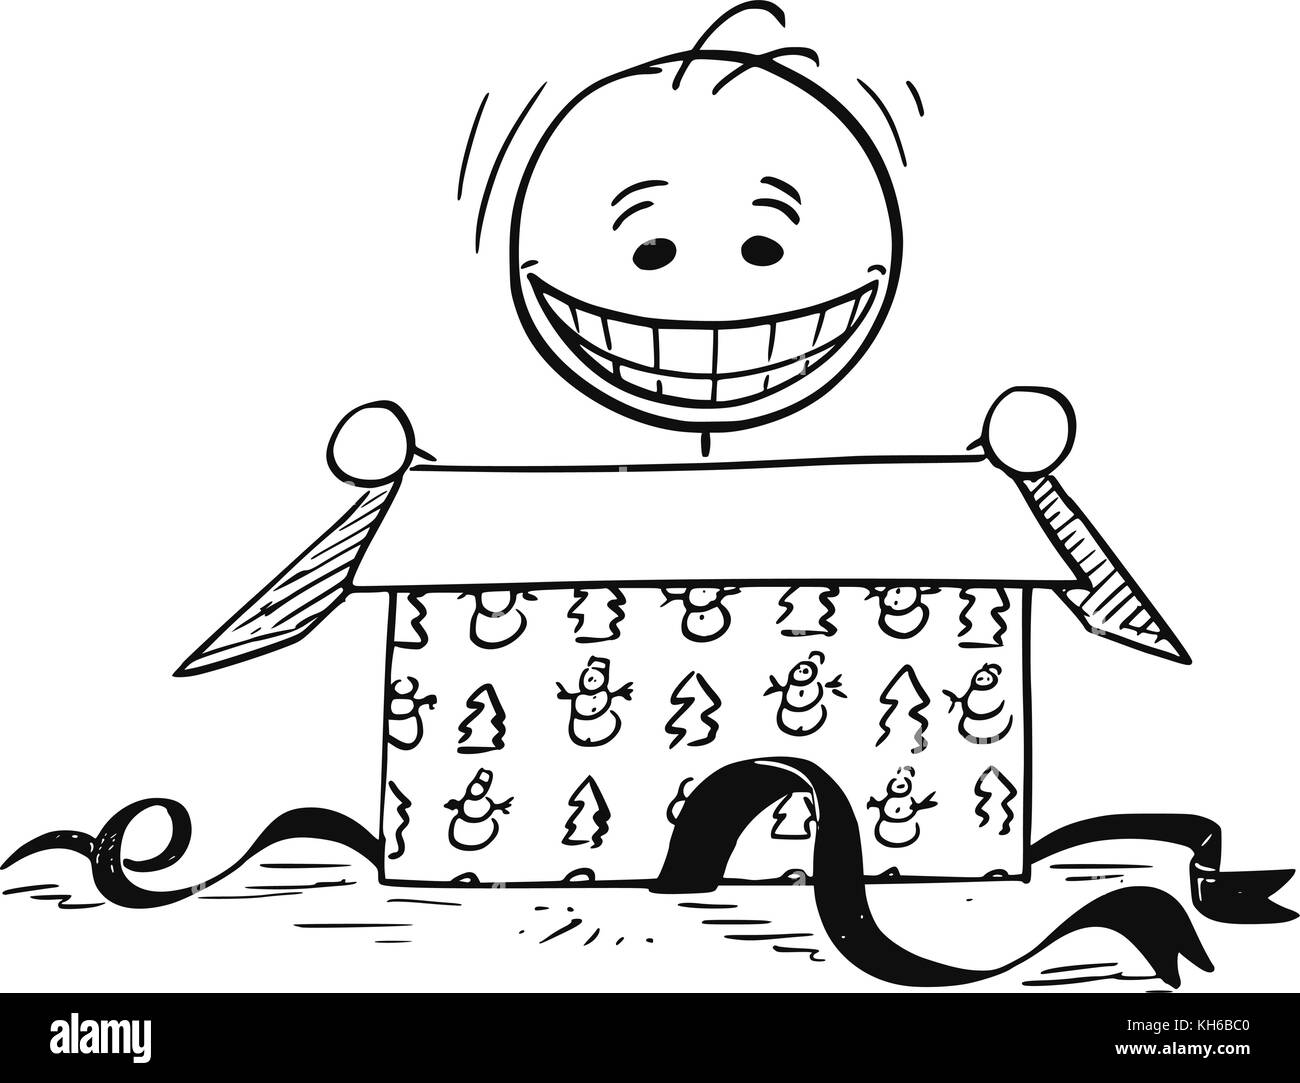 Cartoon stick man drawing illustration of happy smiling man looking in to open Christmas gift box. Stock Vector